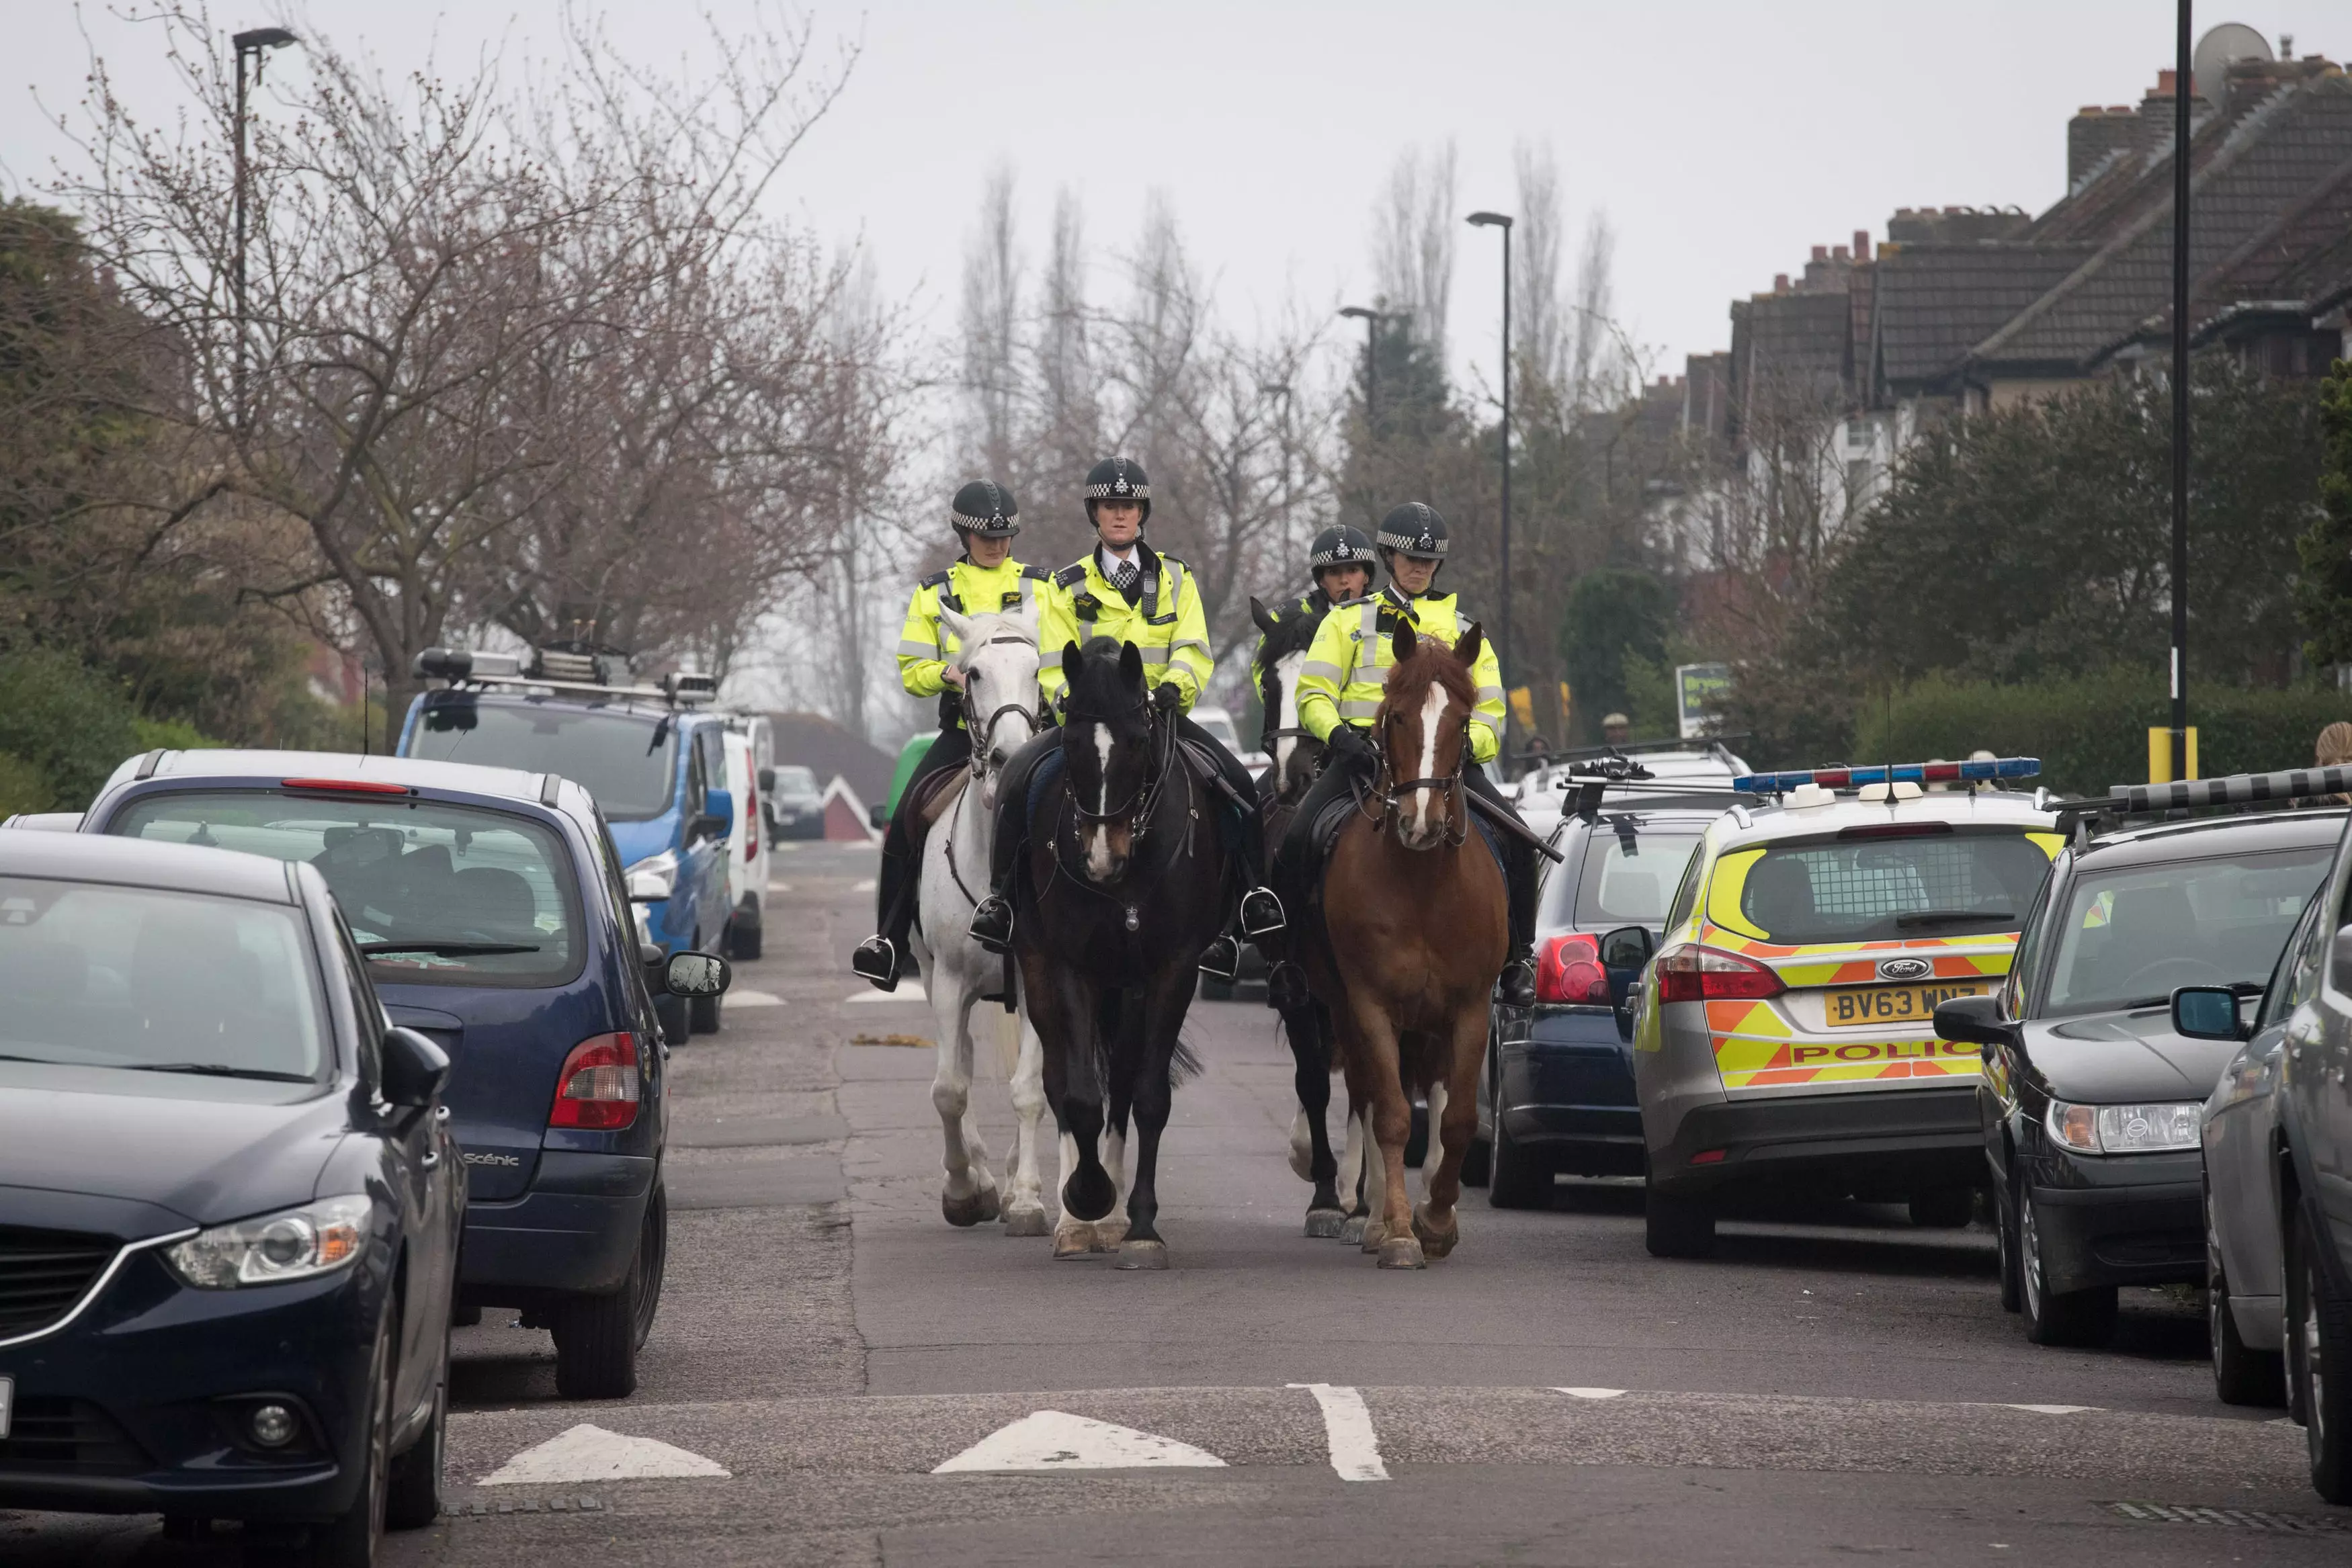 Police patrol the streets in Hither Green.